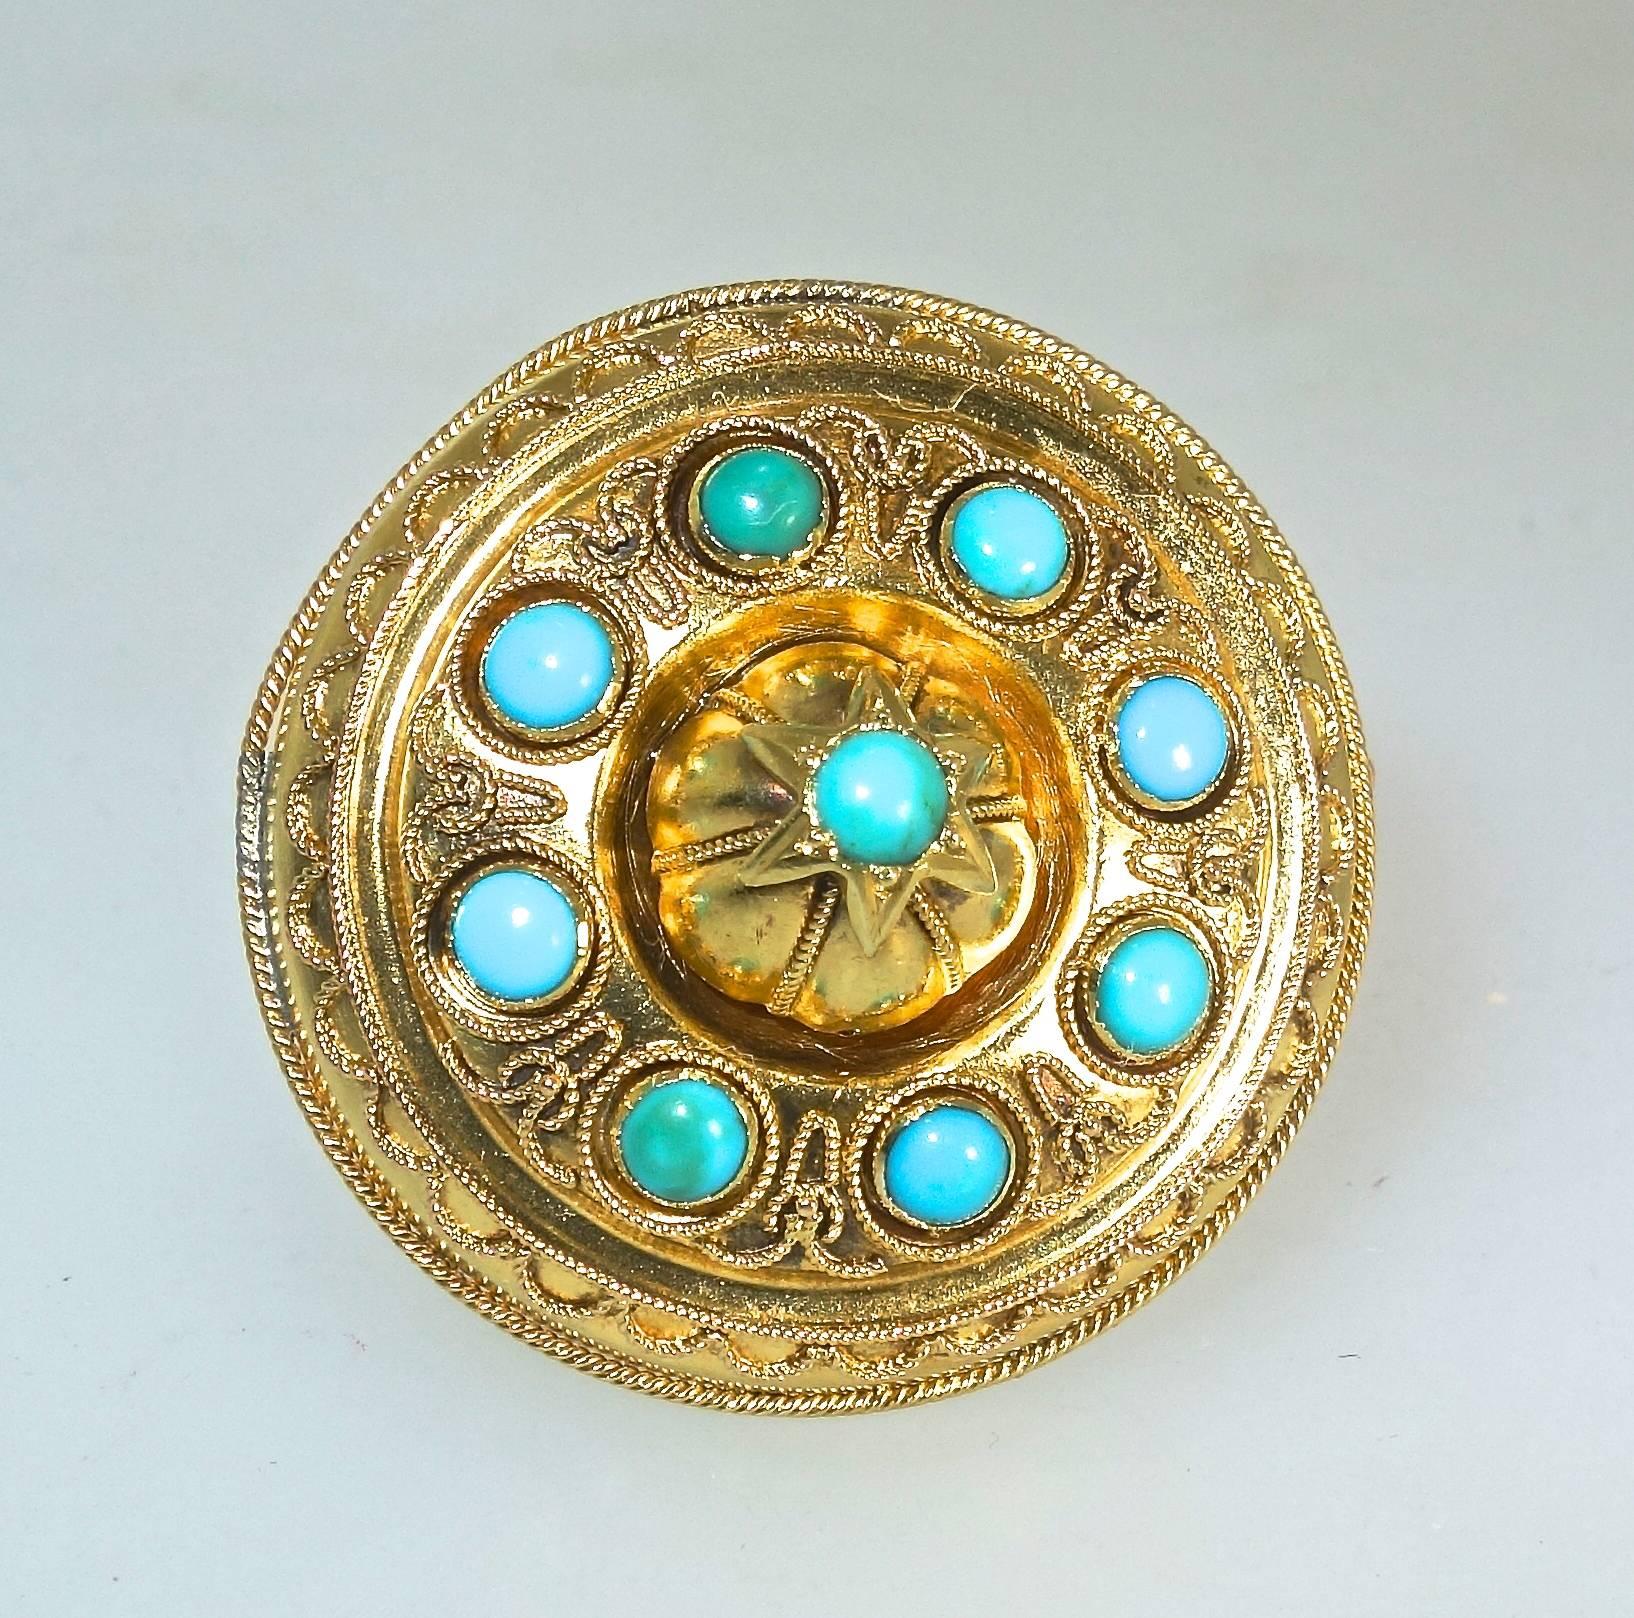 Victorian Antique Etruscan Revival Brooch with Turquoise